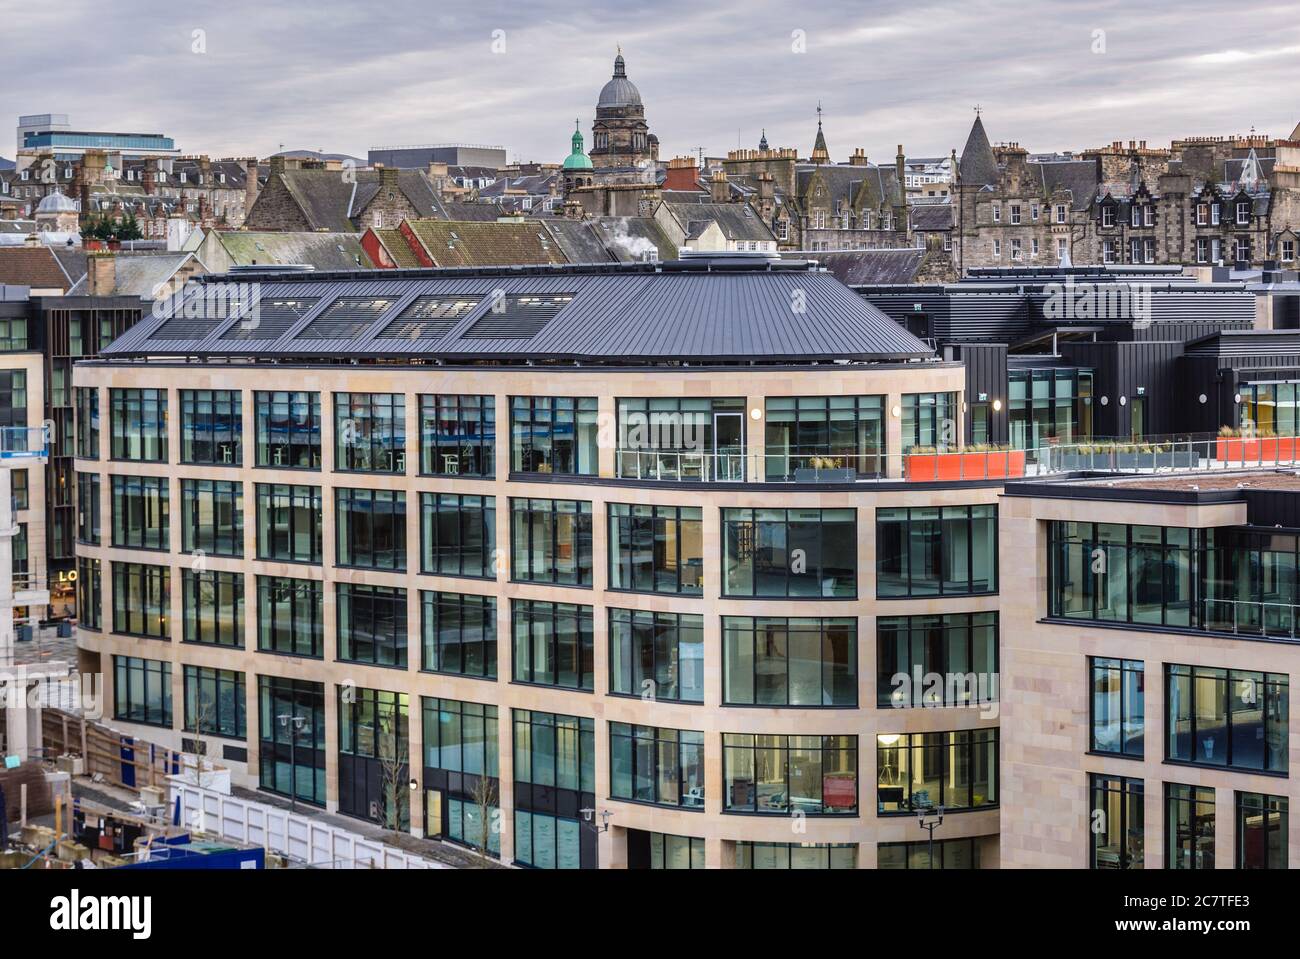 Modern and old architecture in Edinburgh, the capital of Scotland, part of United Kingdom Stock Photo